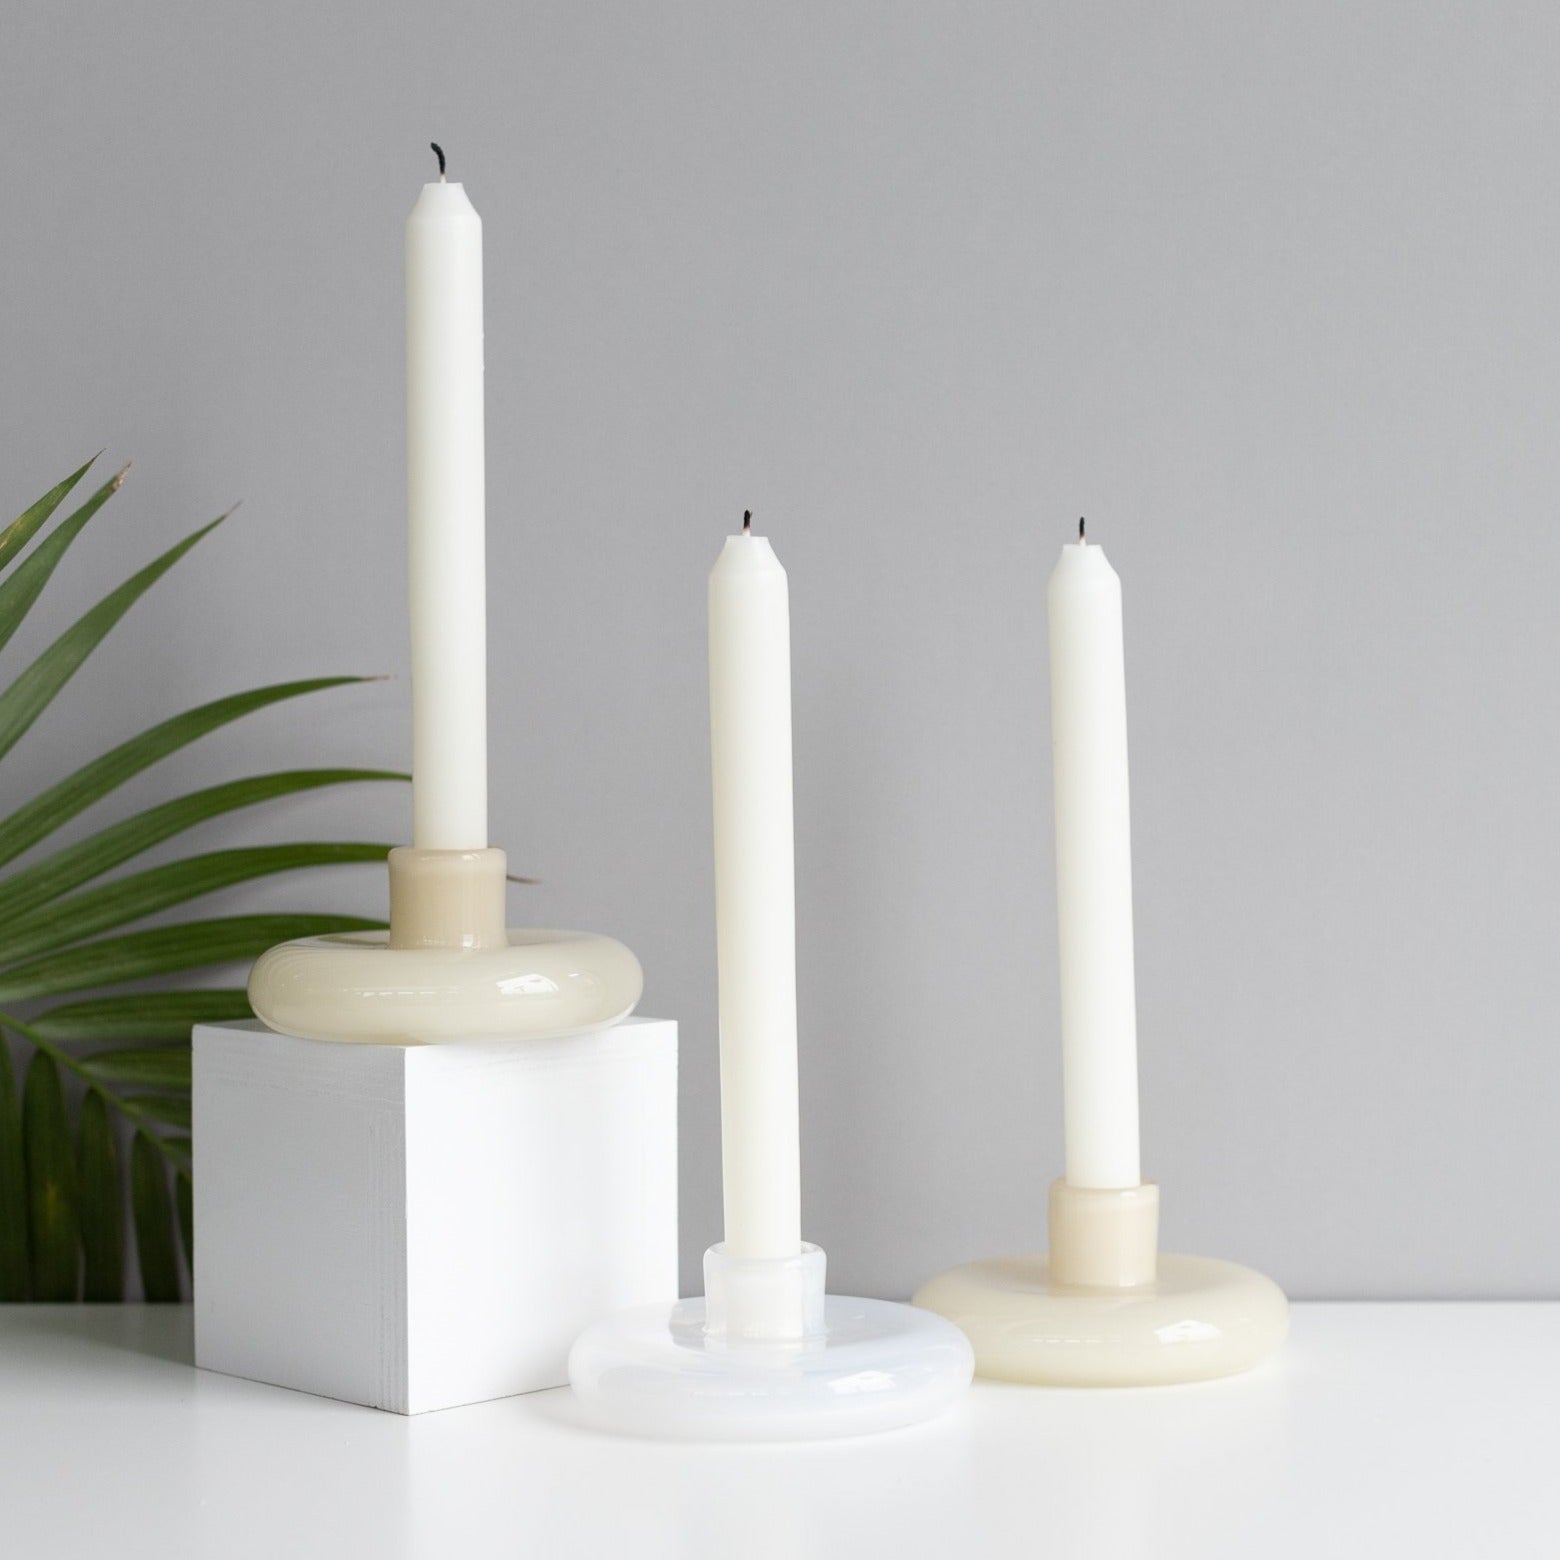 Gary Bodker: Candle Holders